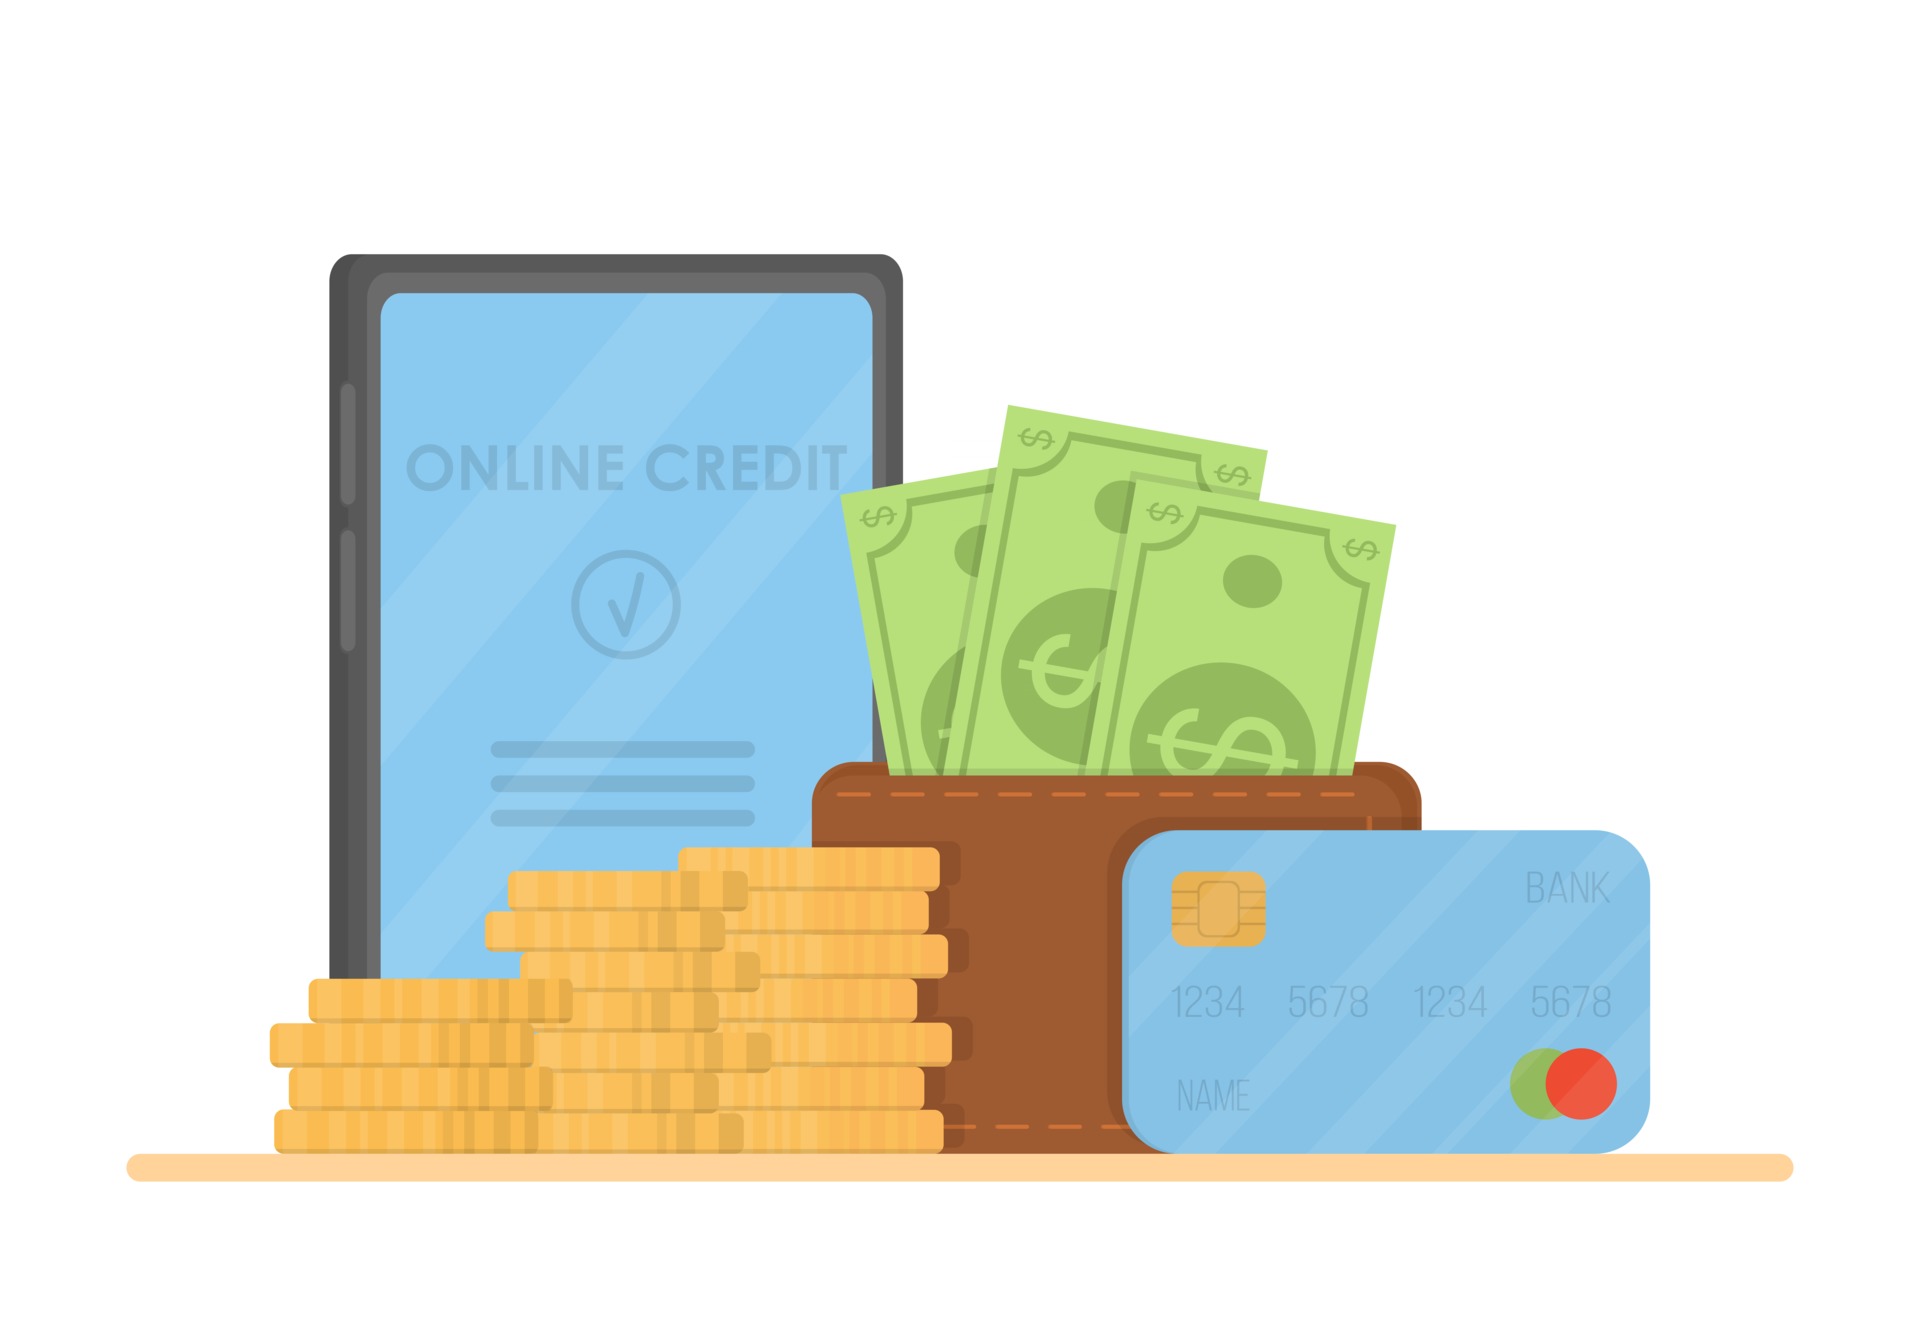 Banking business concept. Online loan confirmation. A phone with a confirmed bank loan on the screen, a stack of money, a credit card and a wallet with dollar bills. Vector illustration in